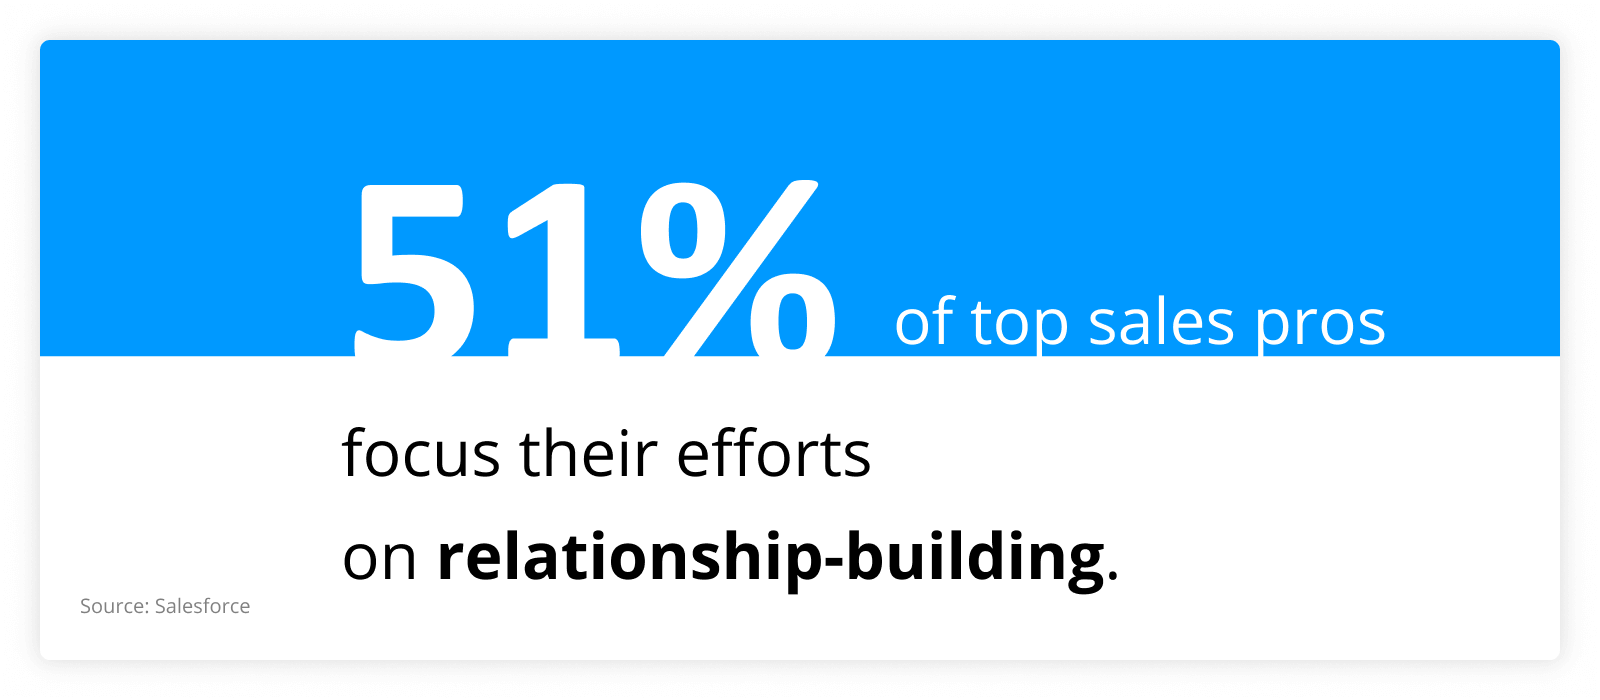 graph showing that 51% of top sales pros focus their efforts on relationship-building.